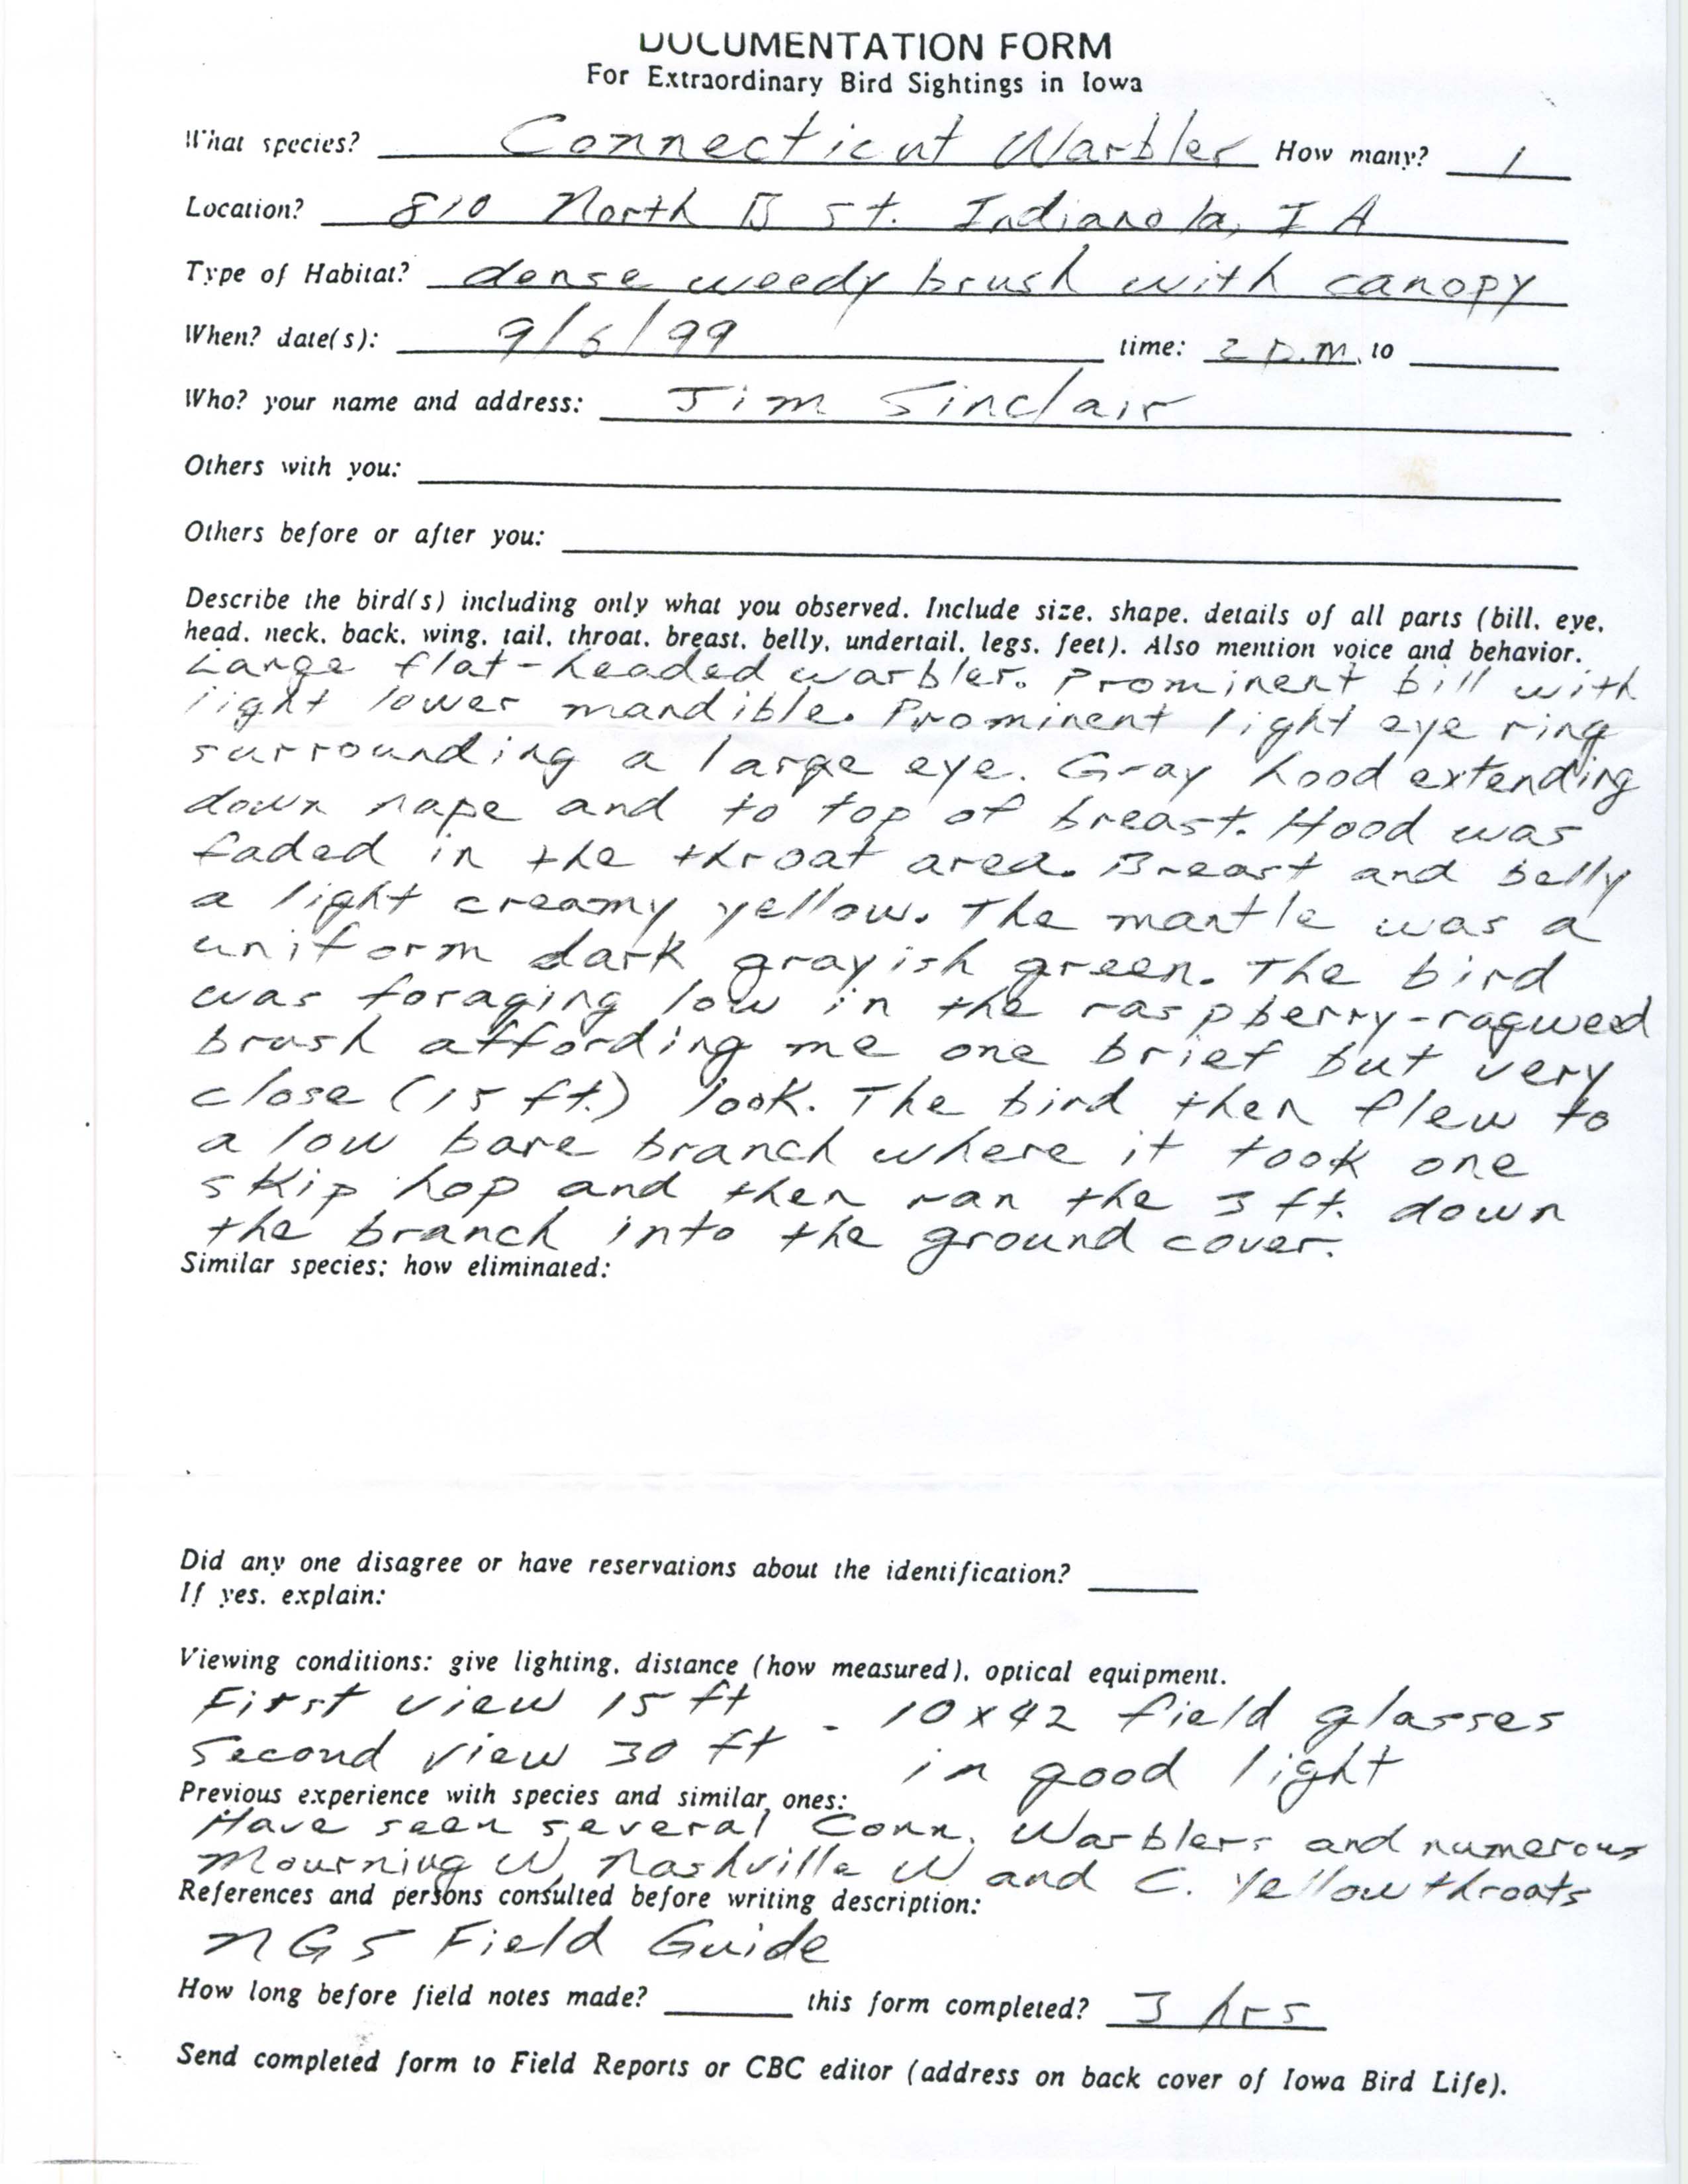 Rare bird documentation form for Connecticut Warbler at Indianola, 1999